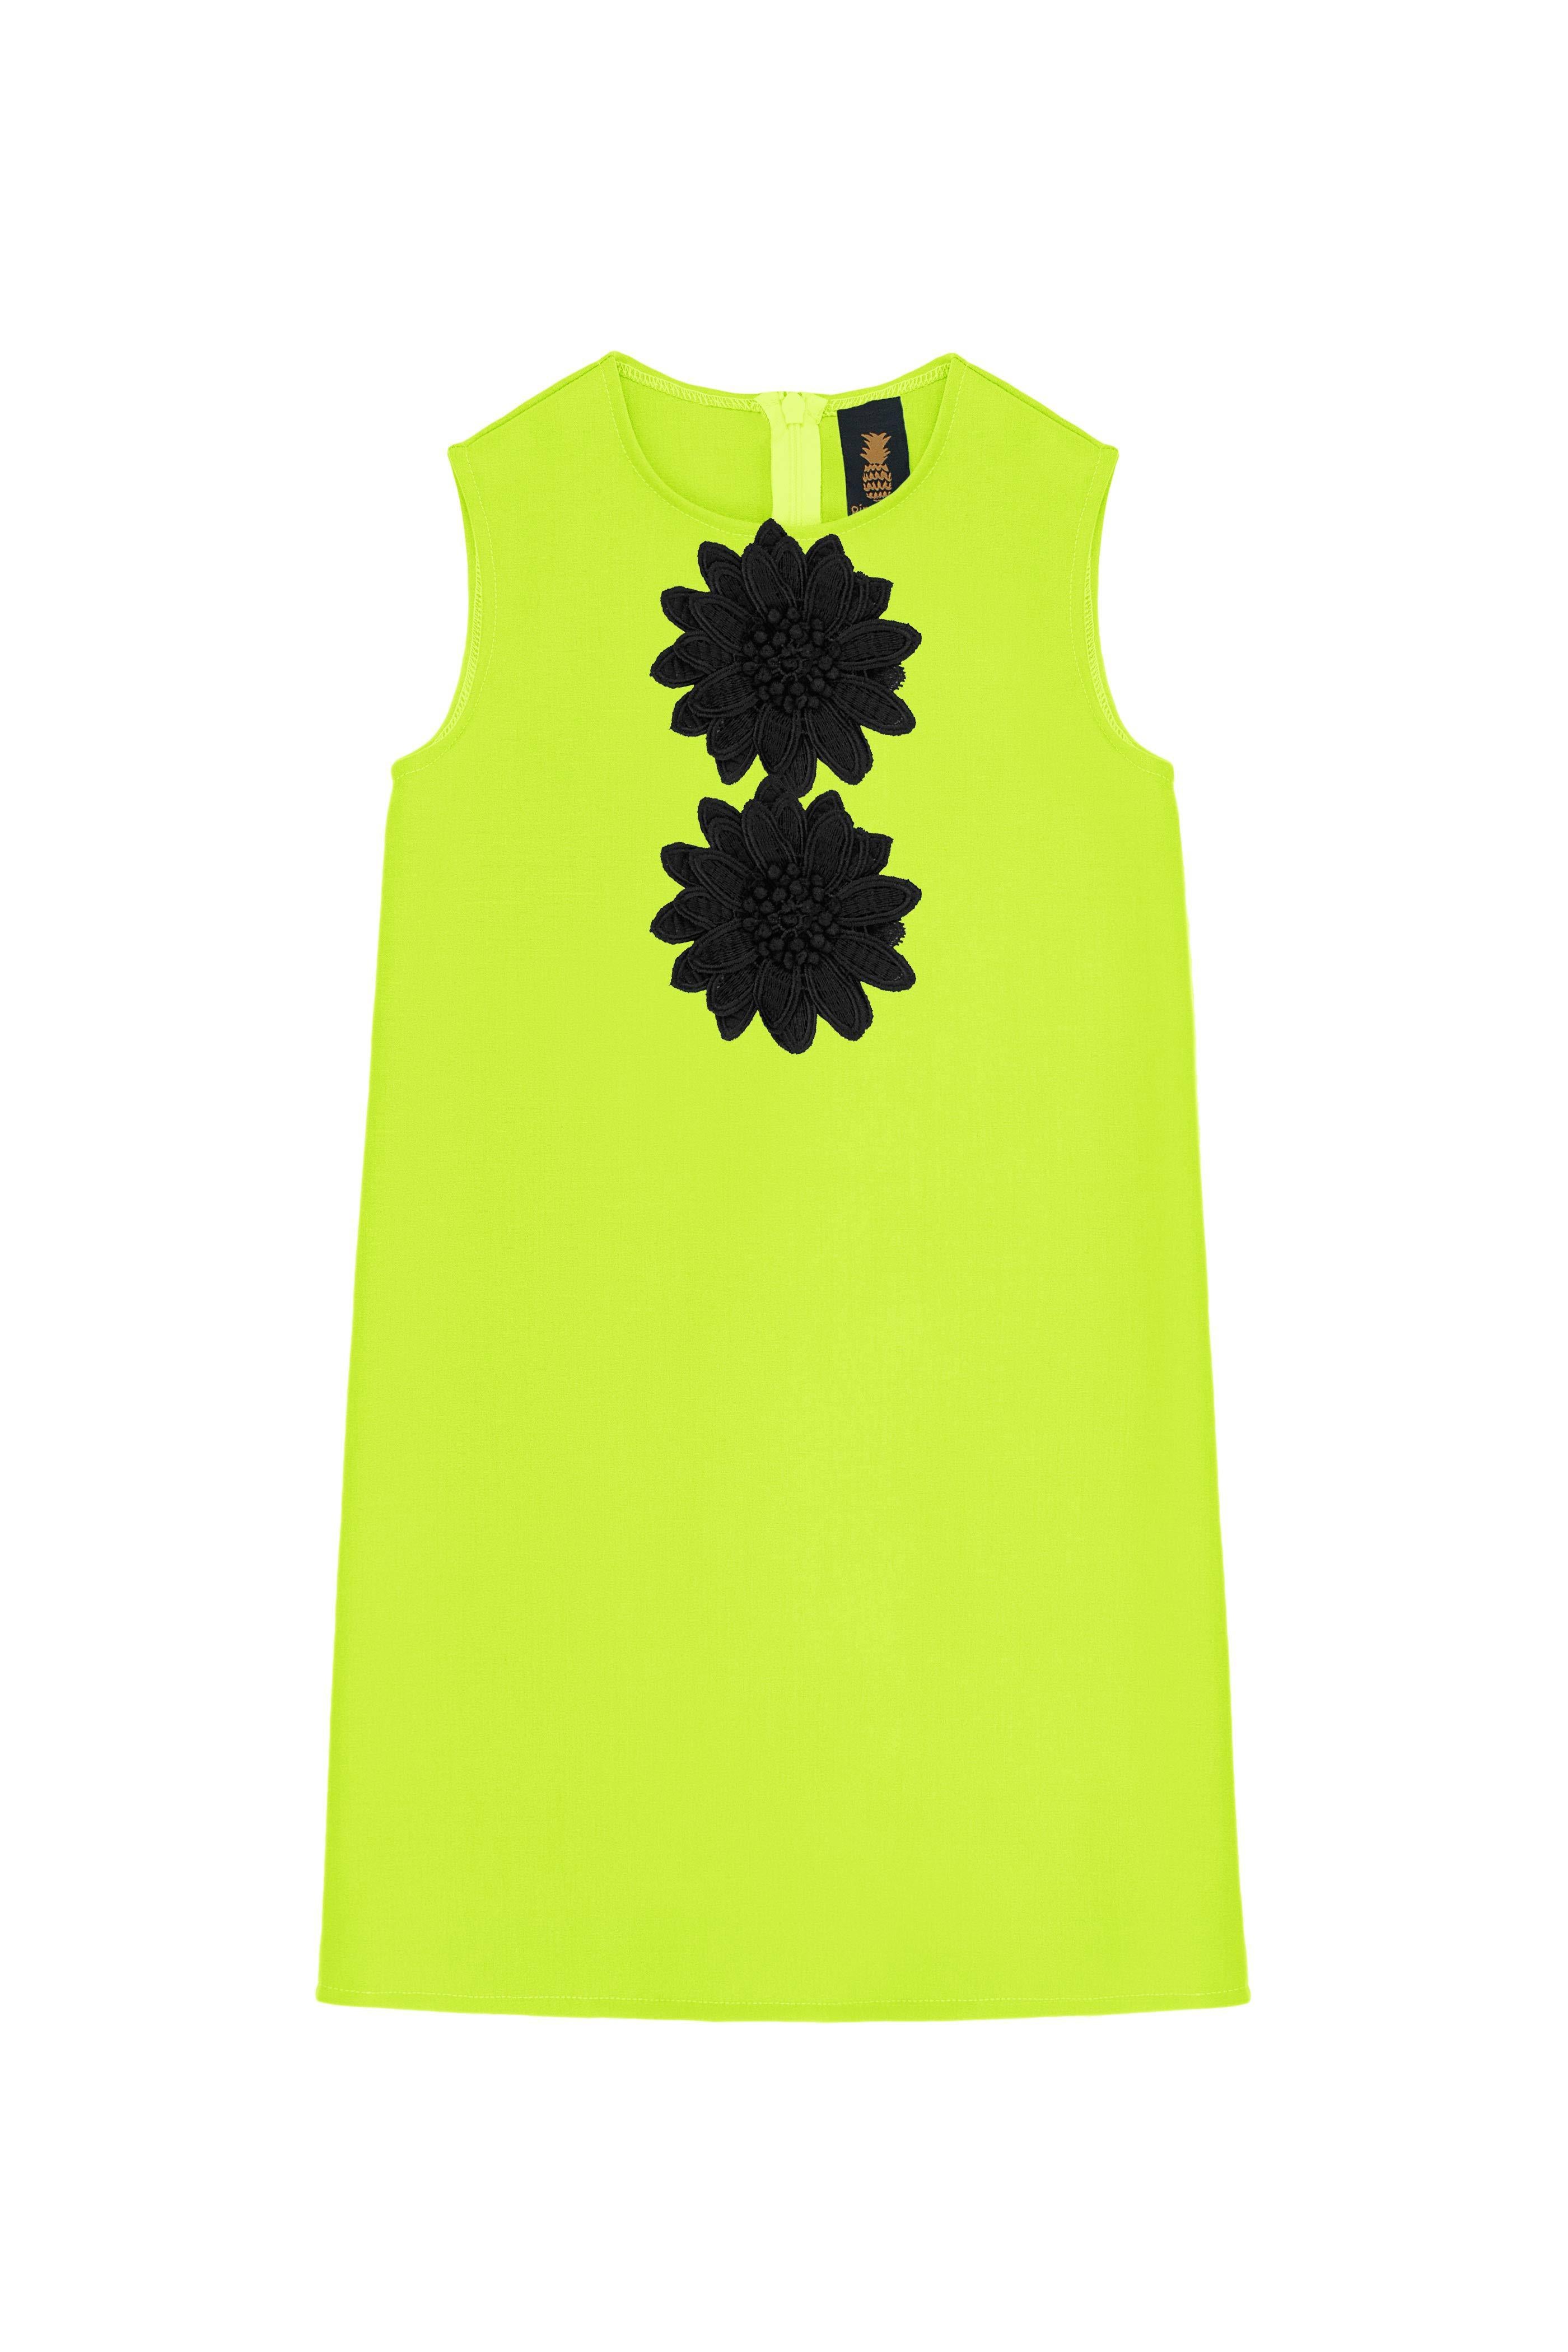 Neon Yellow Black Beige A-line Shift Trapeze Party Dress - Girls - Pineapple Clothing